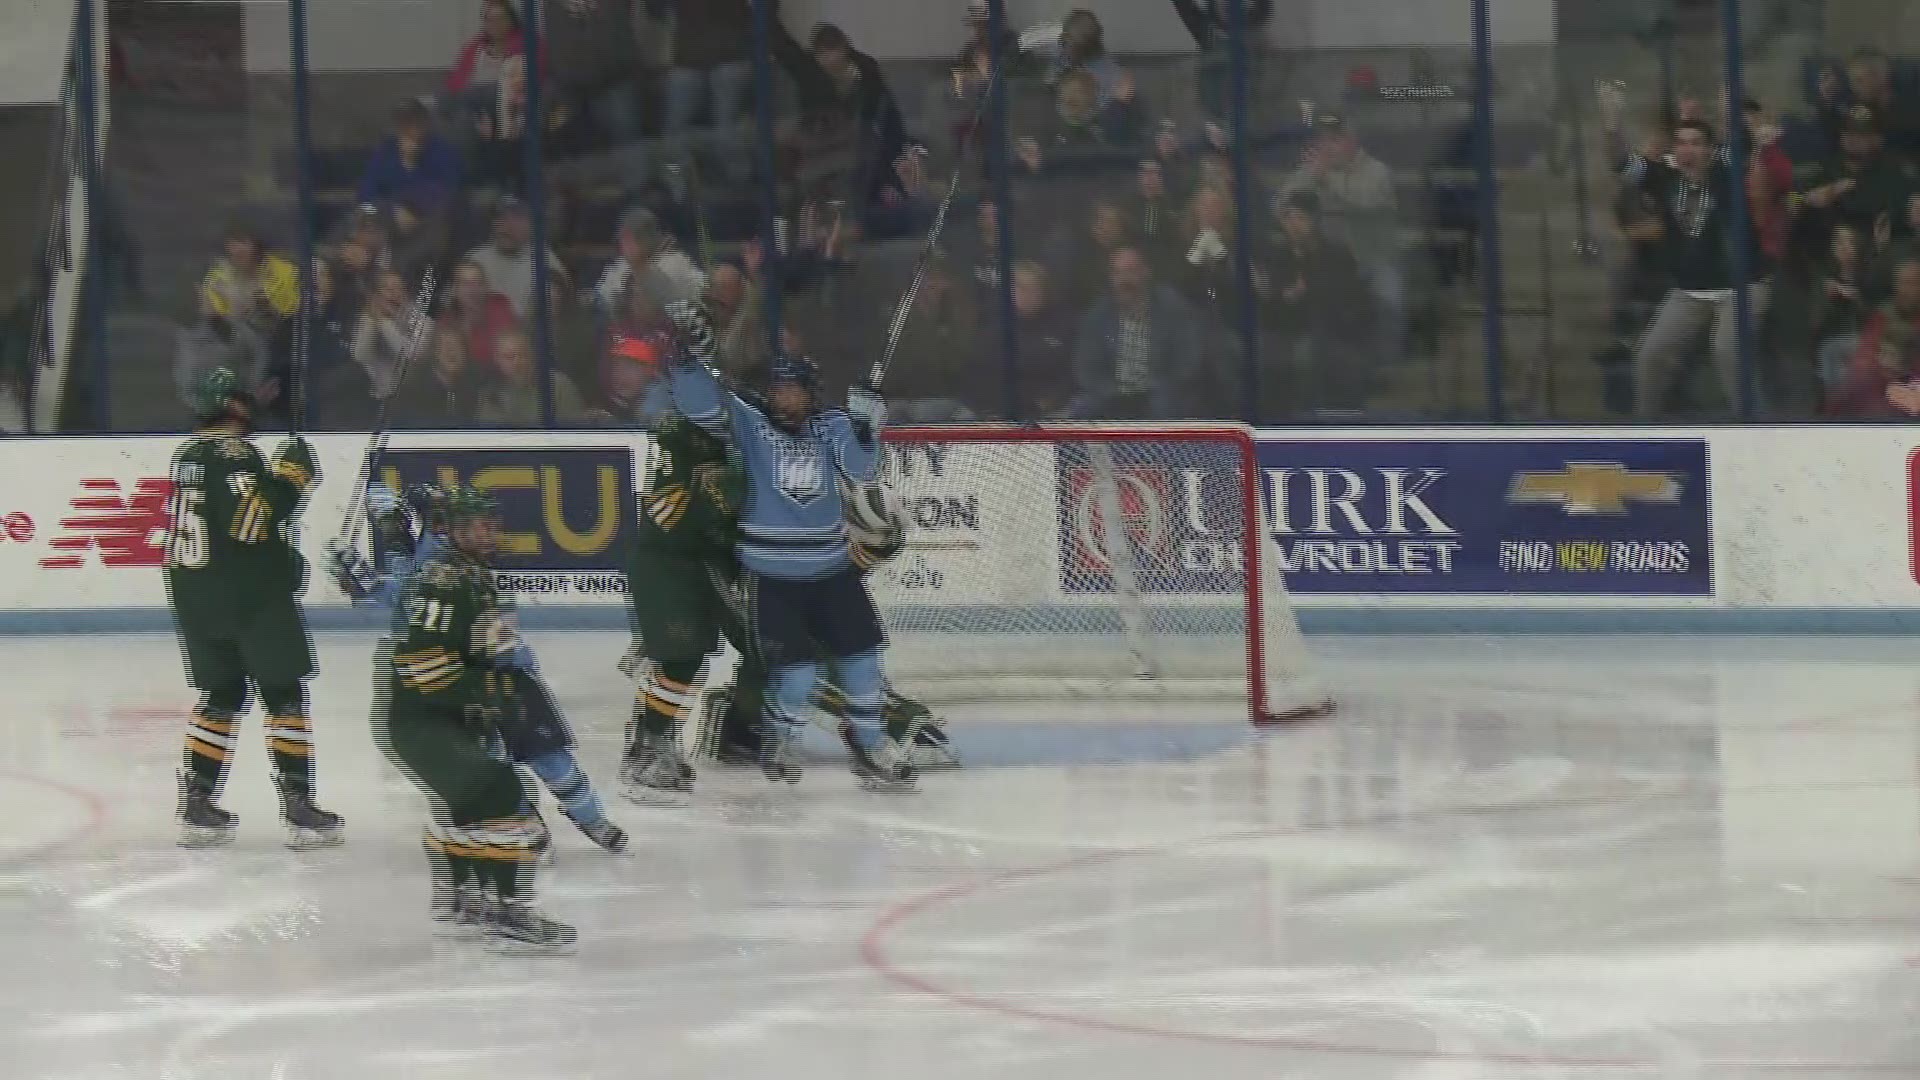 In a game against Vermont on Nov. 20, 2015, Dan Renouf (wearing jersey no. 2) scored two goals to lead UMaine to a 3-2 win.